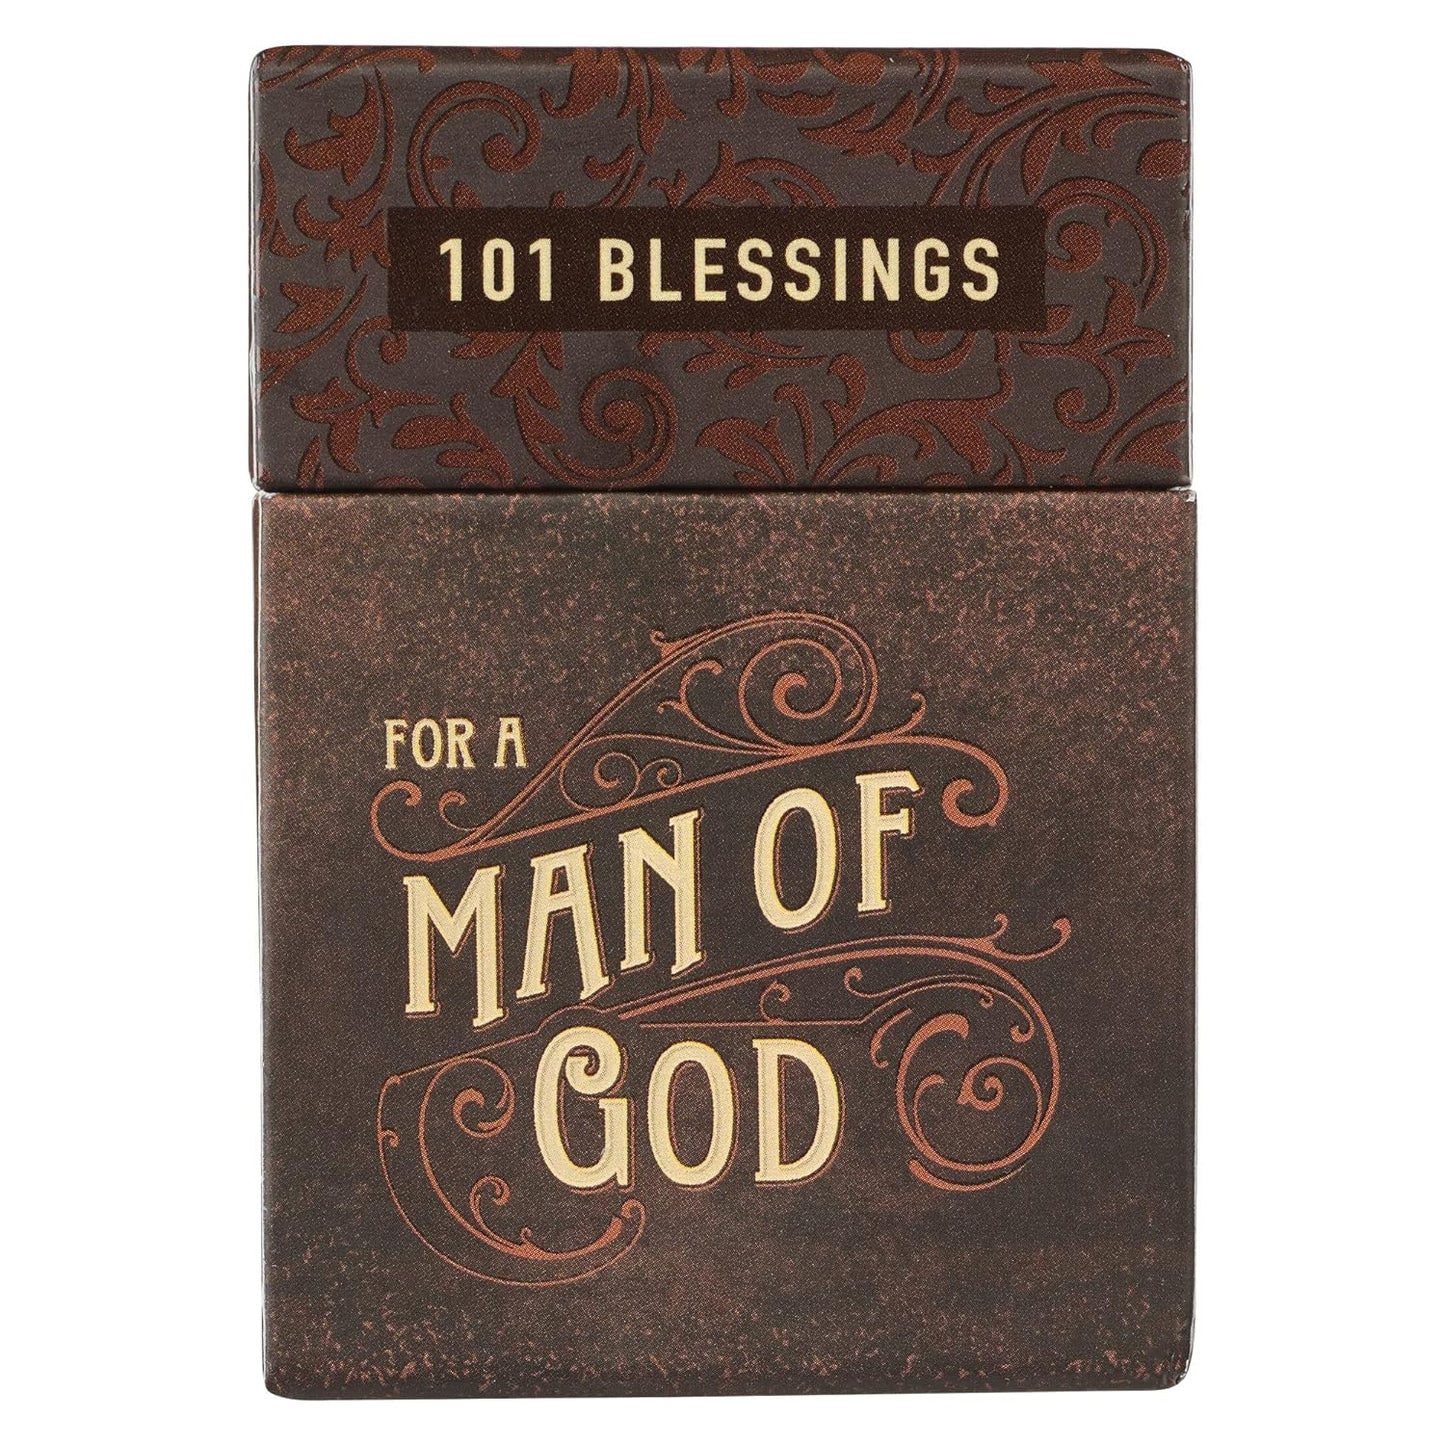 Box of Blessings, for a Man of God